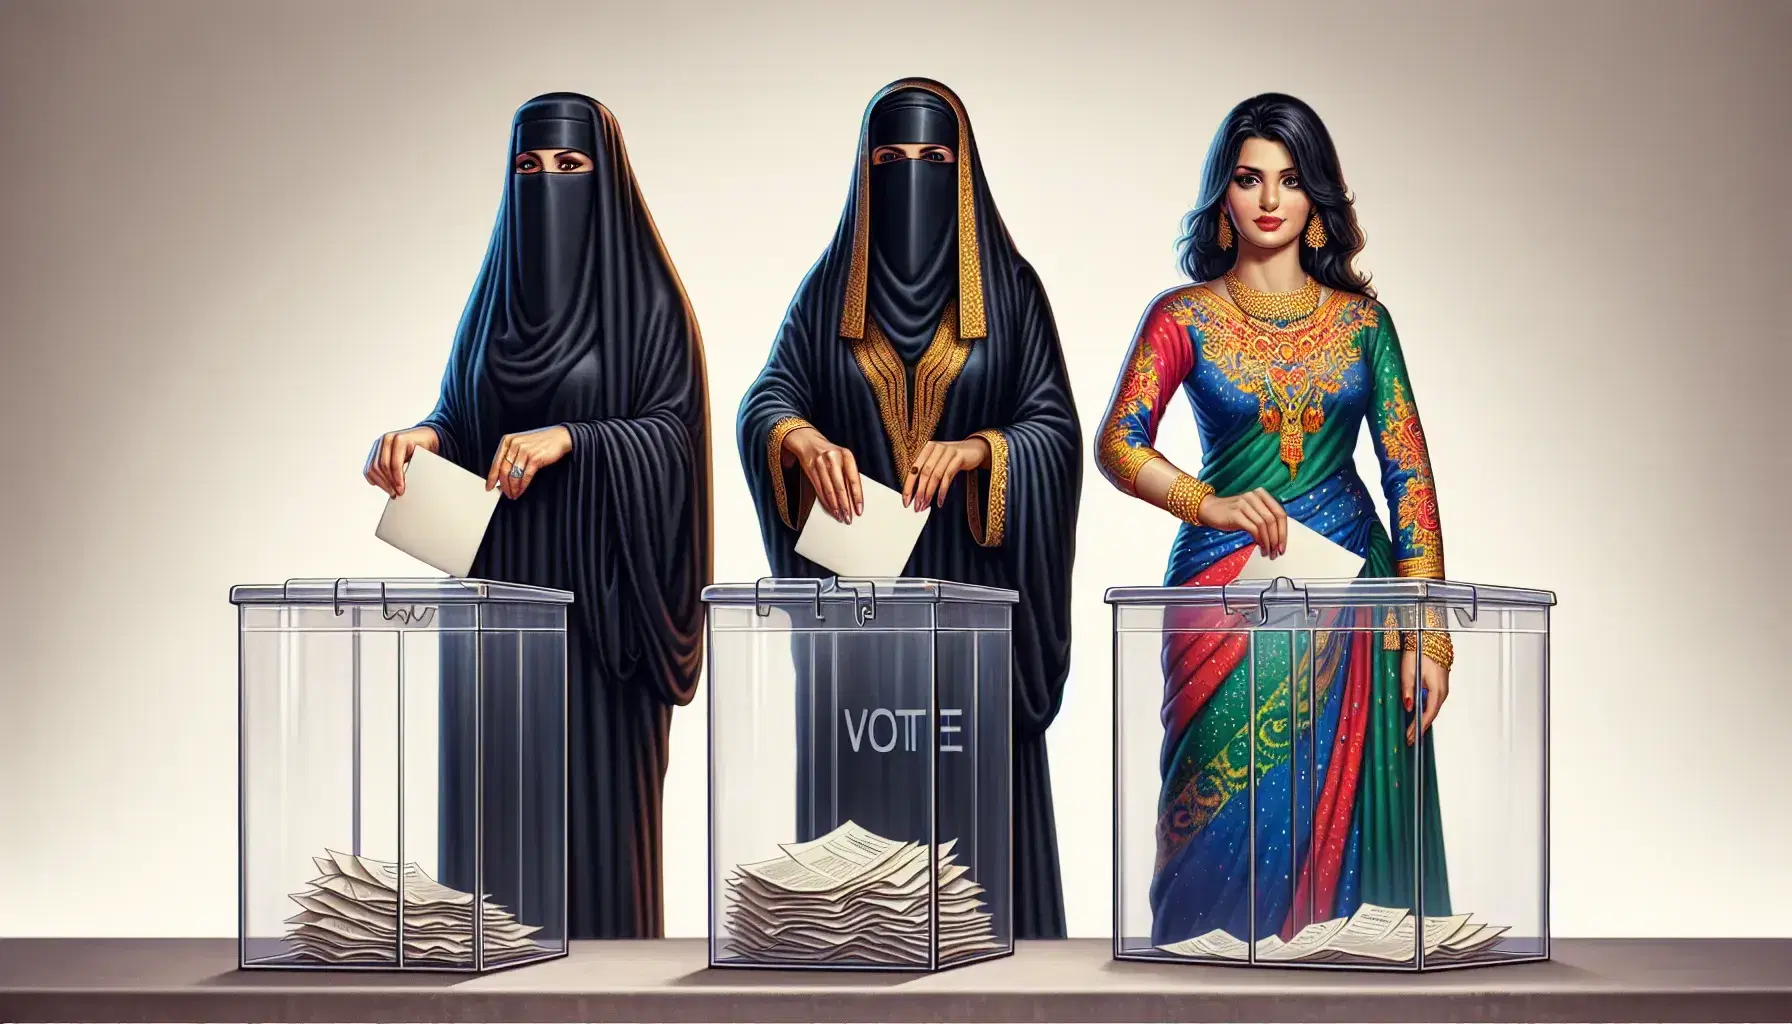 Three women of different ethnicities vote together, symbolizing unity and equality, with traditional clothes and a transparent ballot box.